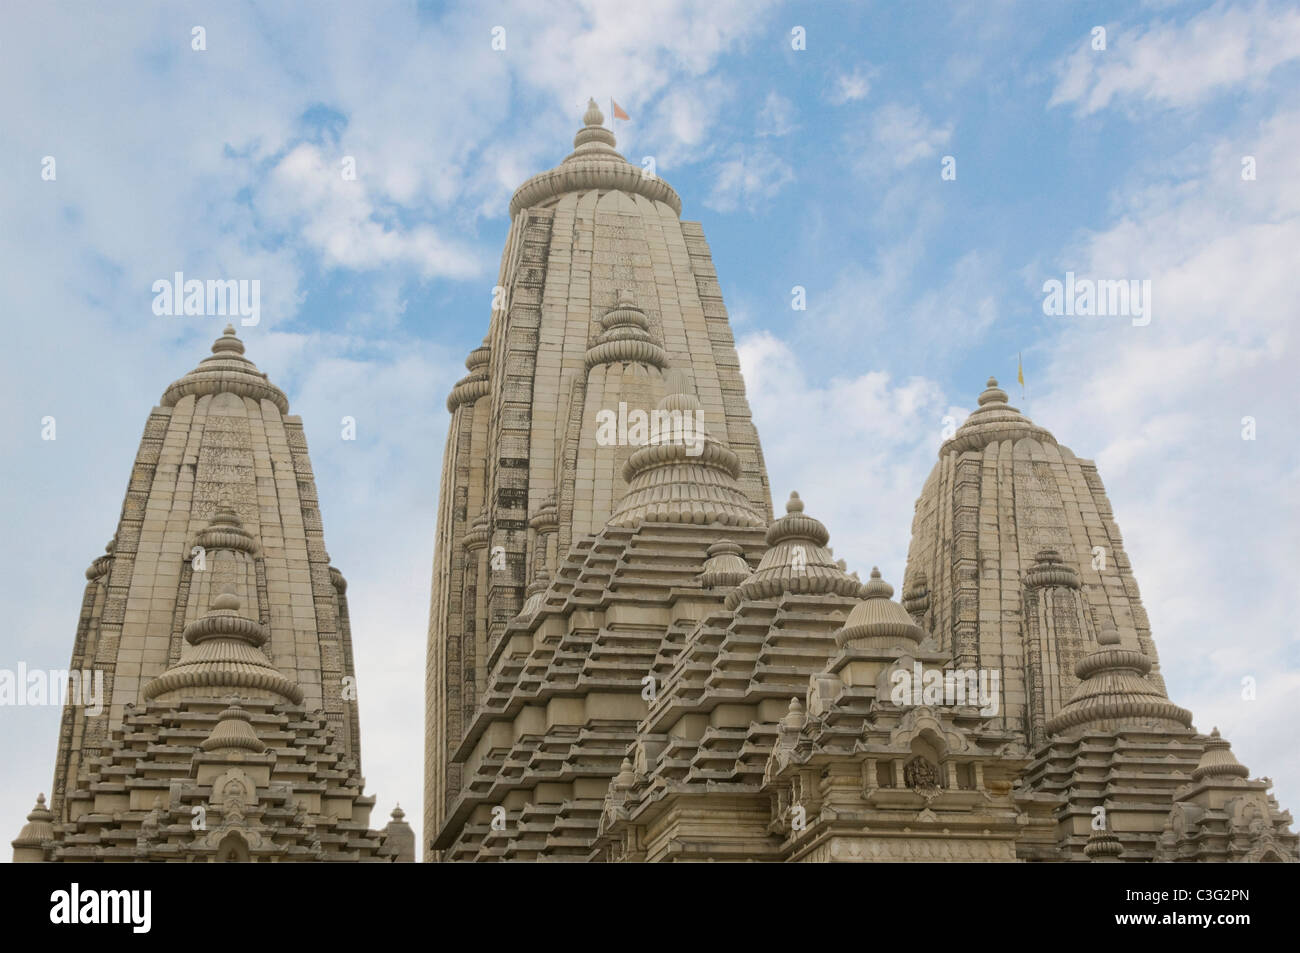 Low angle view of a temple, Birla Temple, Kolkata, West Bengal, India Stock Photo